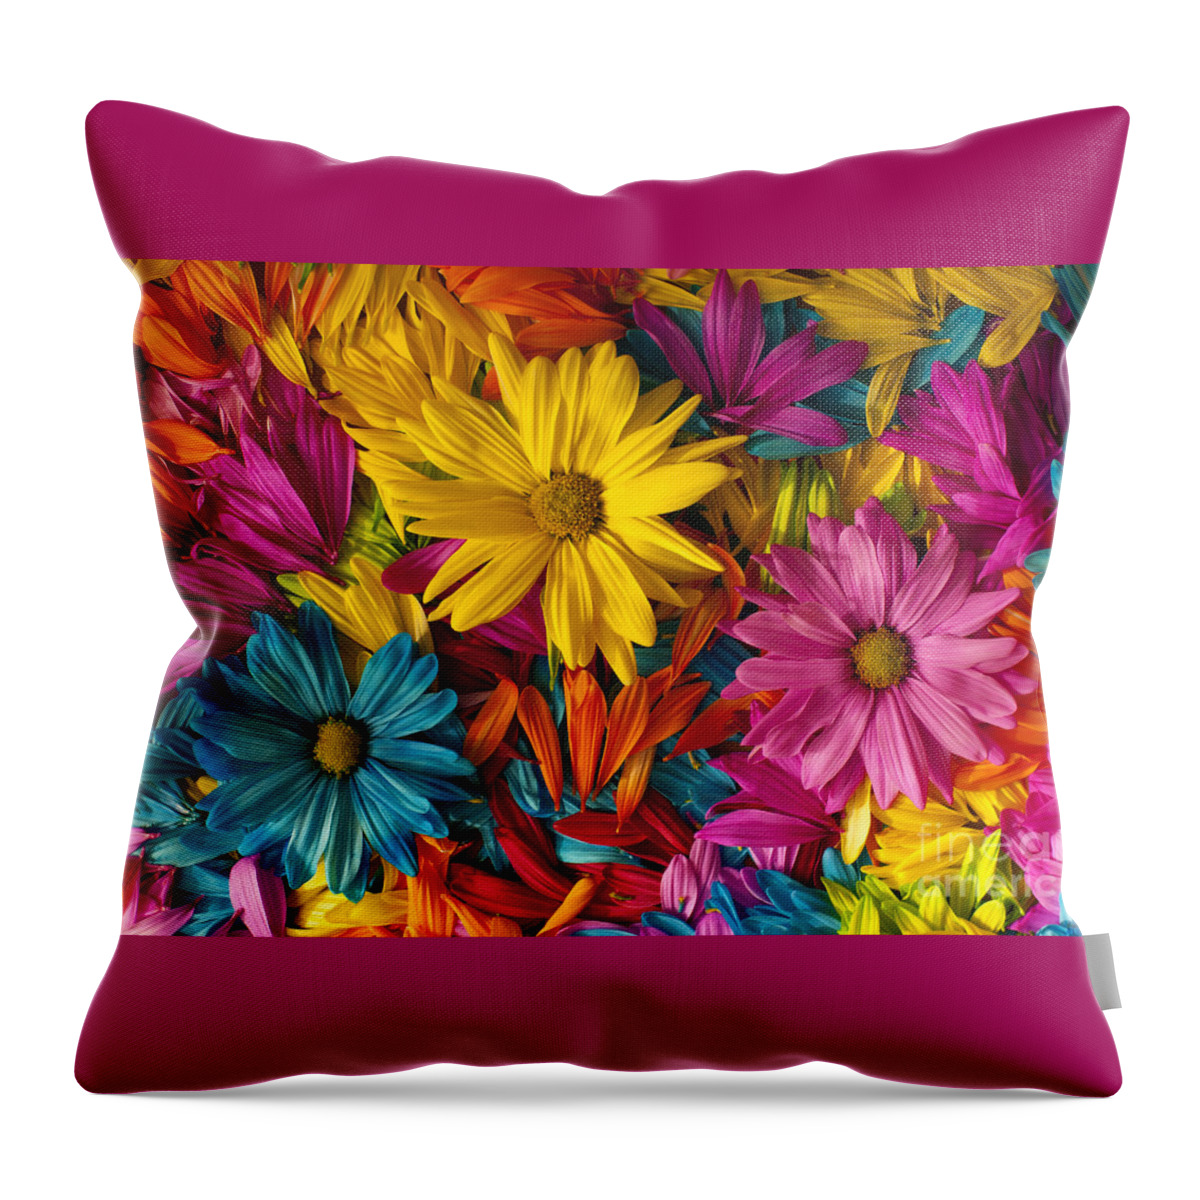 Abstract Throw Pillow featuring the photograph Daisies Petals #4 by Jim Corwin